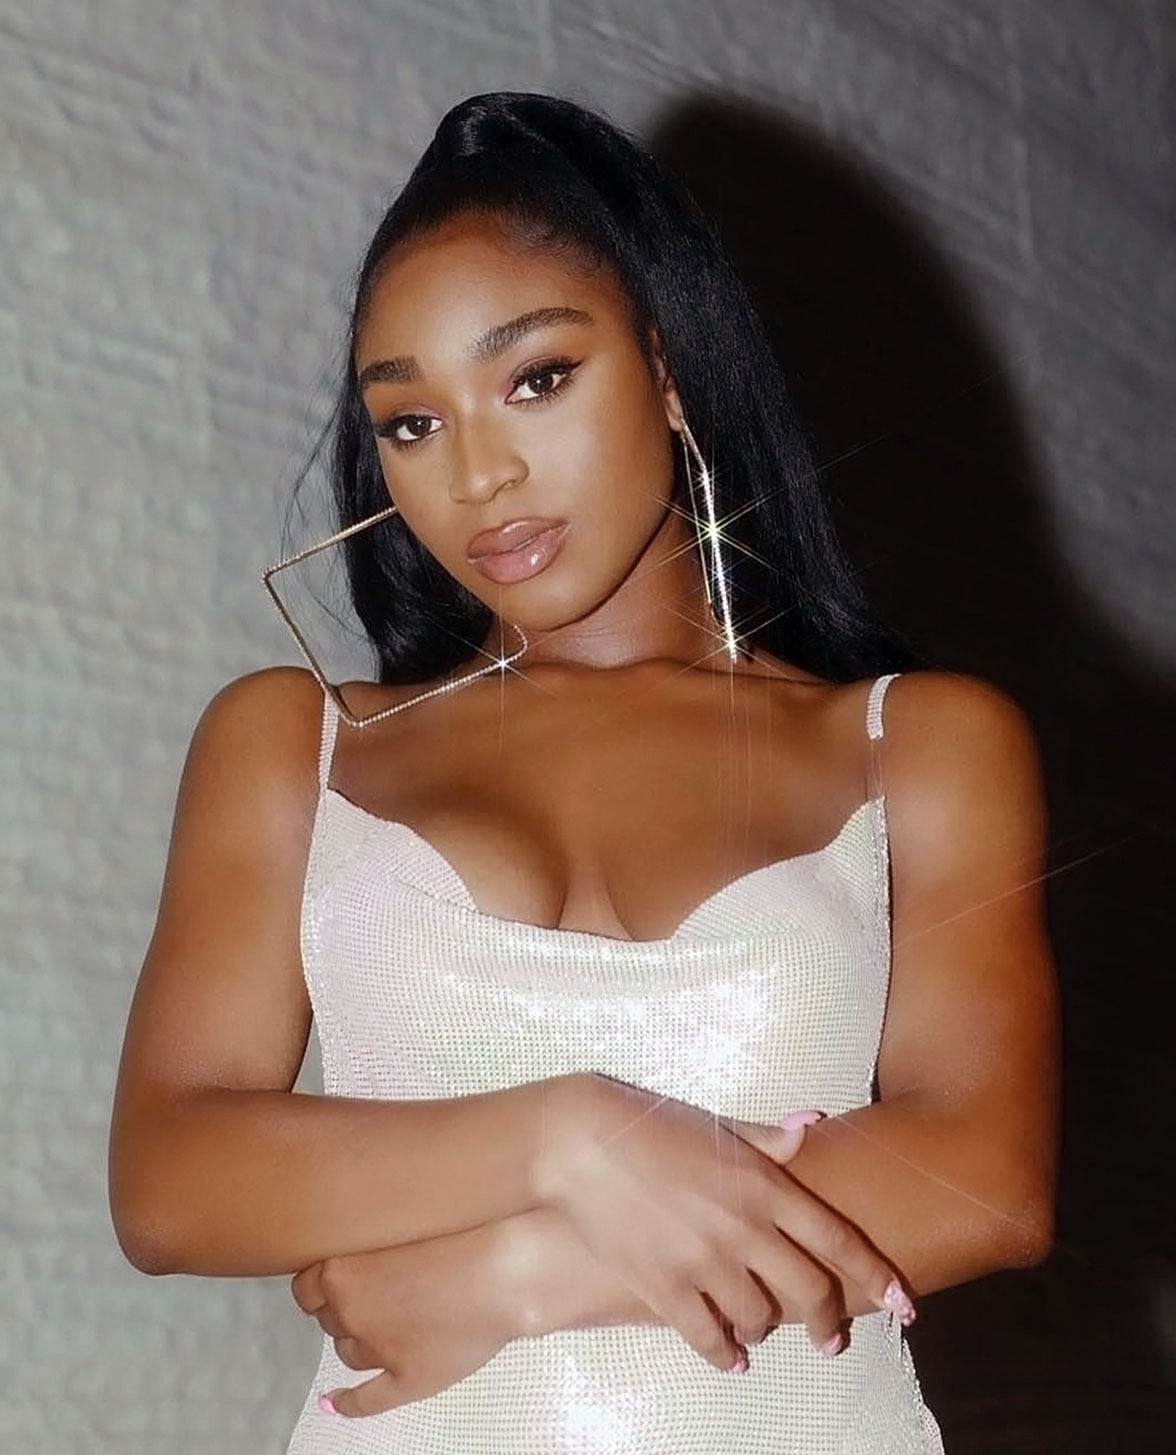 Okay, folks, check out extremely hot singer Normani nude photos, and trust ...